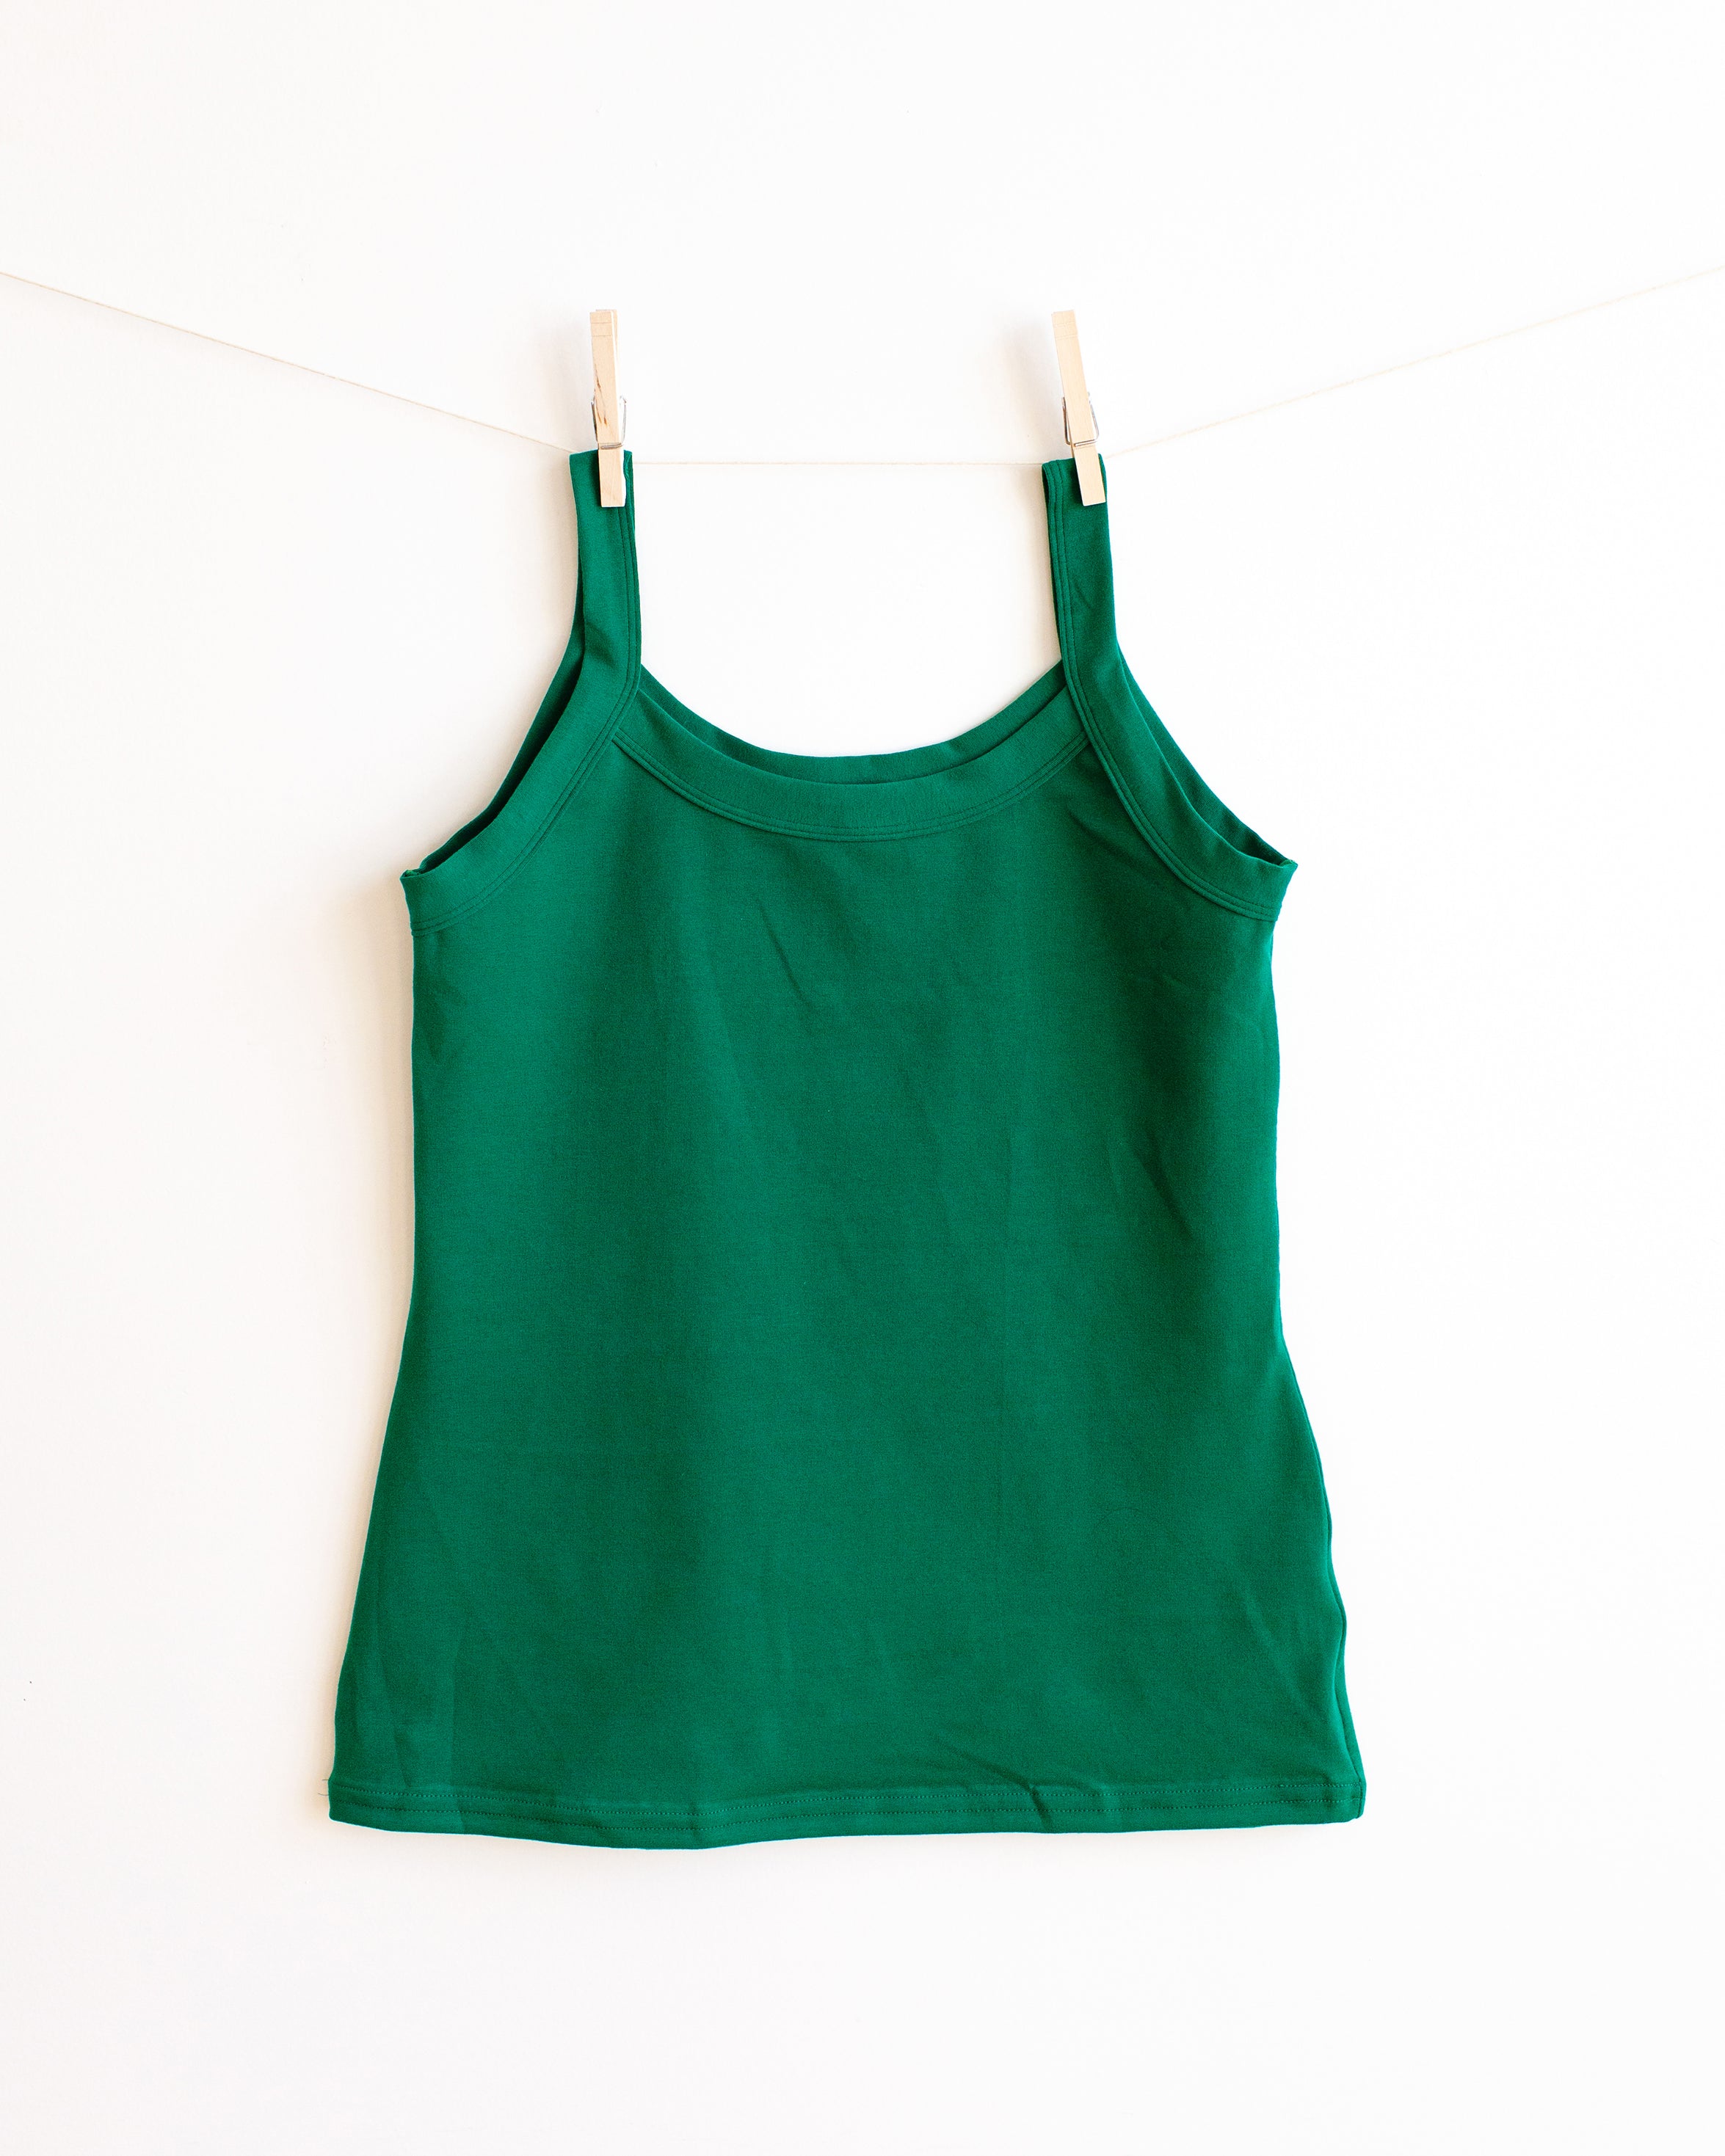 Thunderpants Camisole in Emerald Green hanging by clothes pins on a white wall.